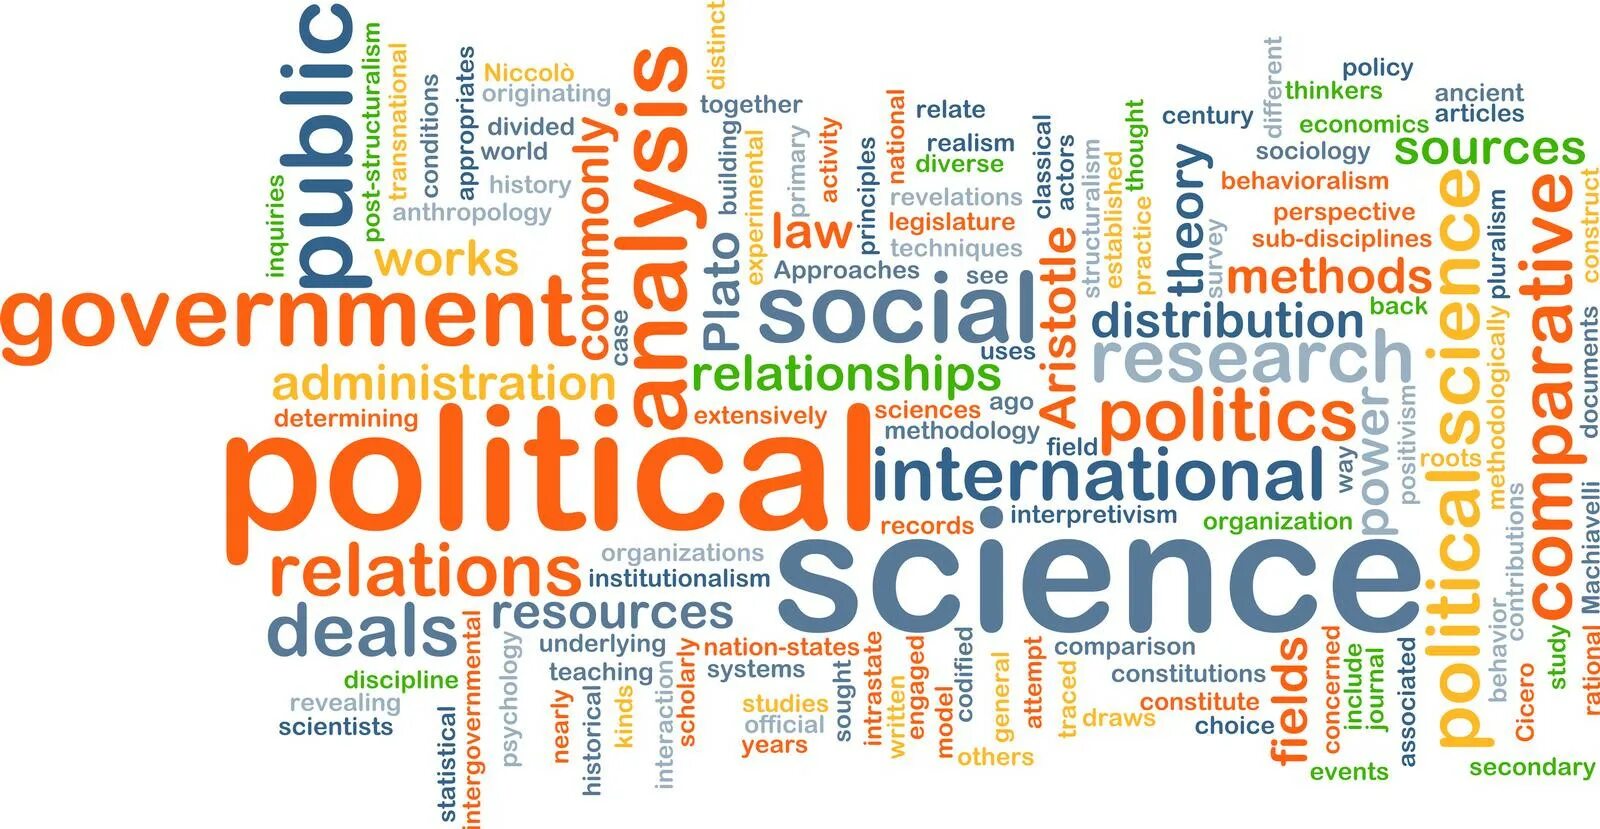 Political Science. What is political Science. Government relations картинки. Government and Politics.